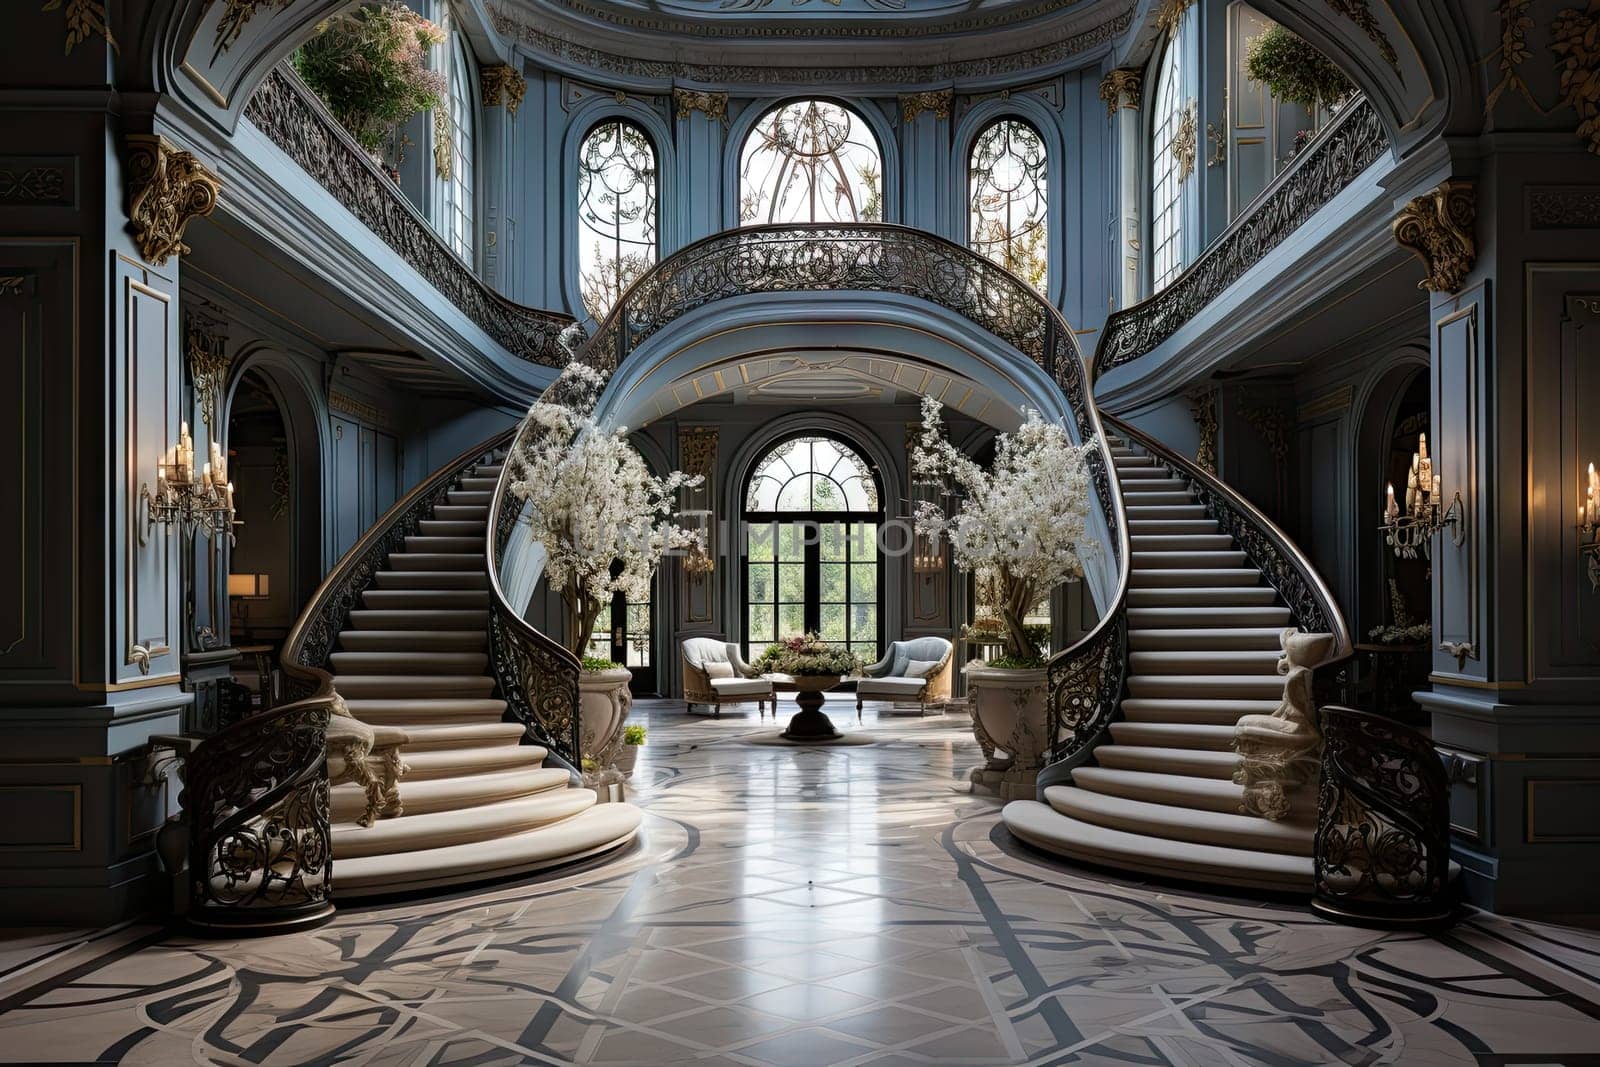 A Grand Entrance: A Majestic Foyer with an Elegant Staircase Ascending to the Upper Level